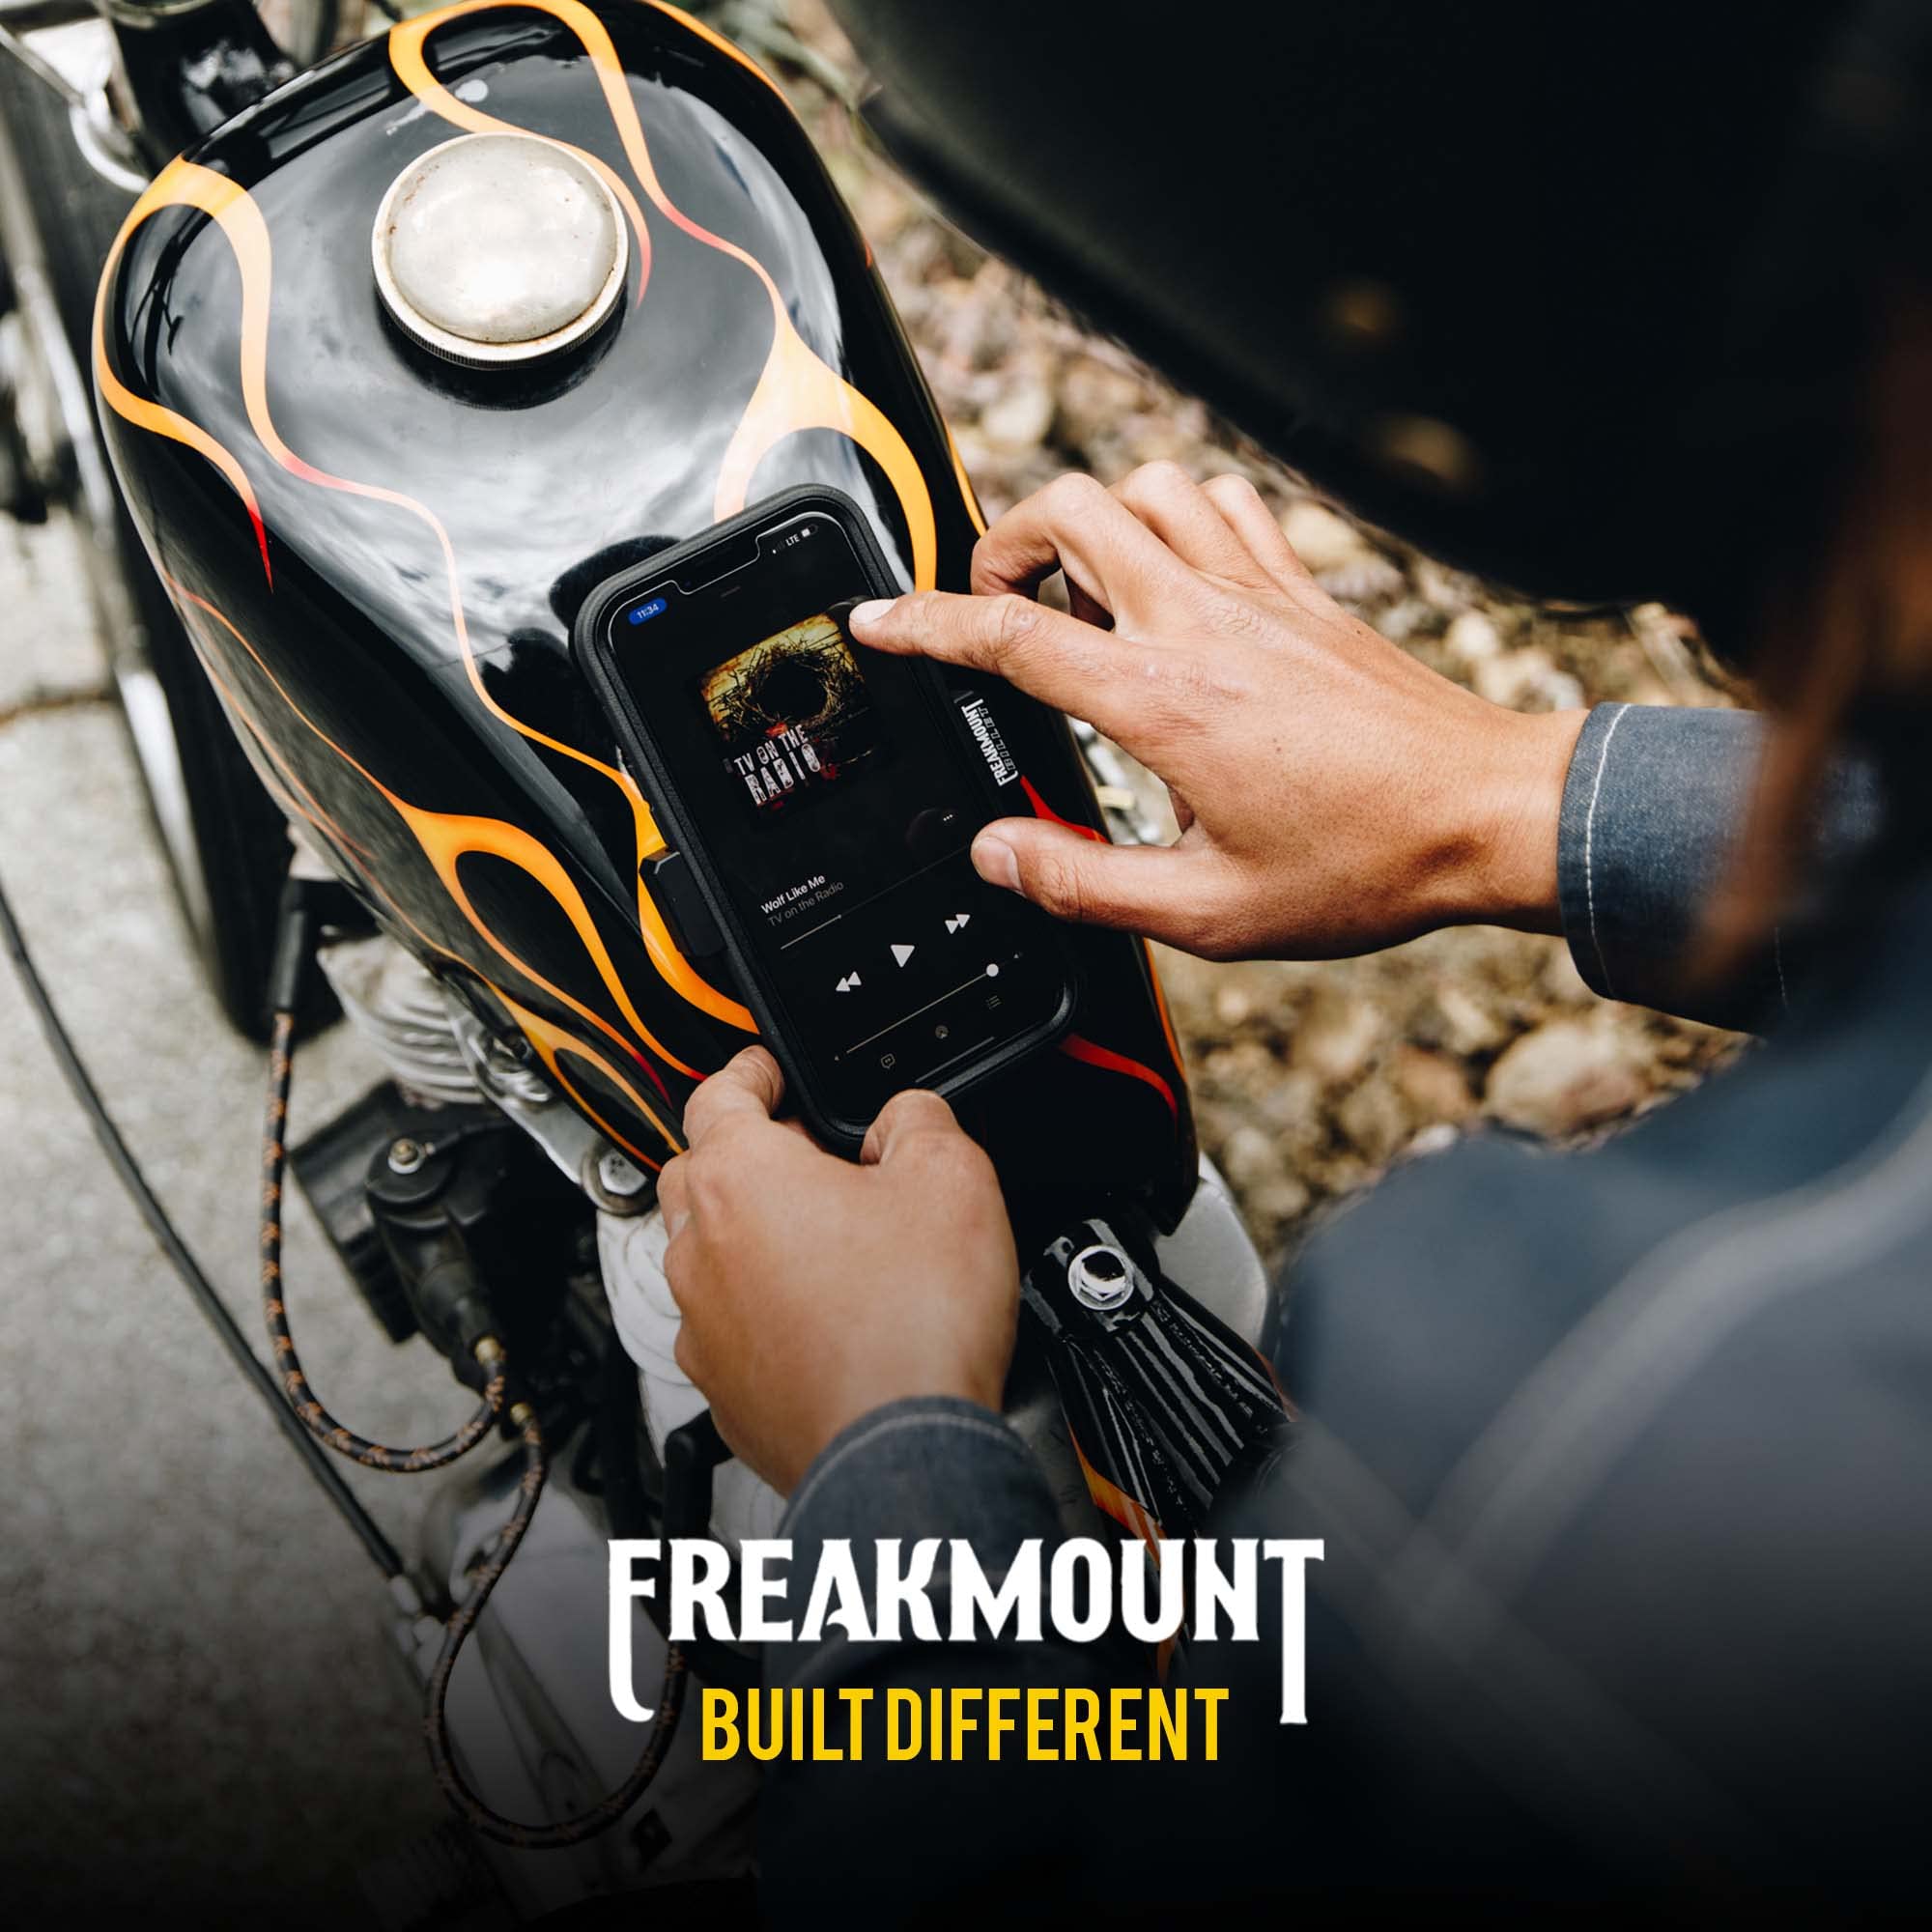 FREAKMOUNT Magnetic Motorcycle Phone Mount - Harley Davidson Accessories - Premium Billet Aluminum Holder for Gas Tank or Any Magnetic Surface, High-Speed Magnets - Fits Most Phones, Black